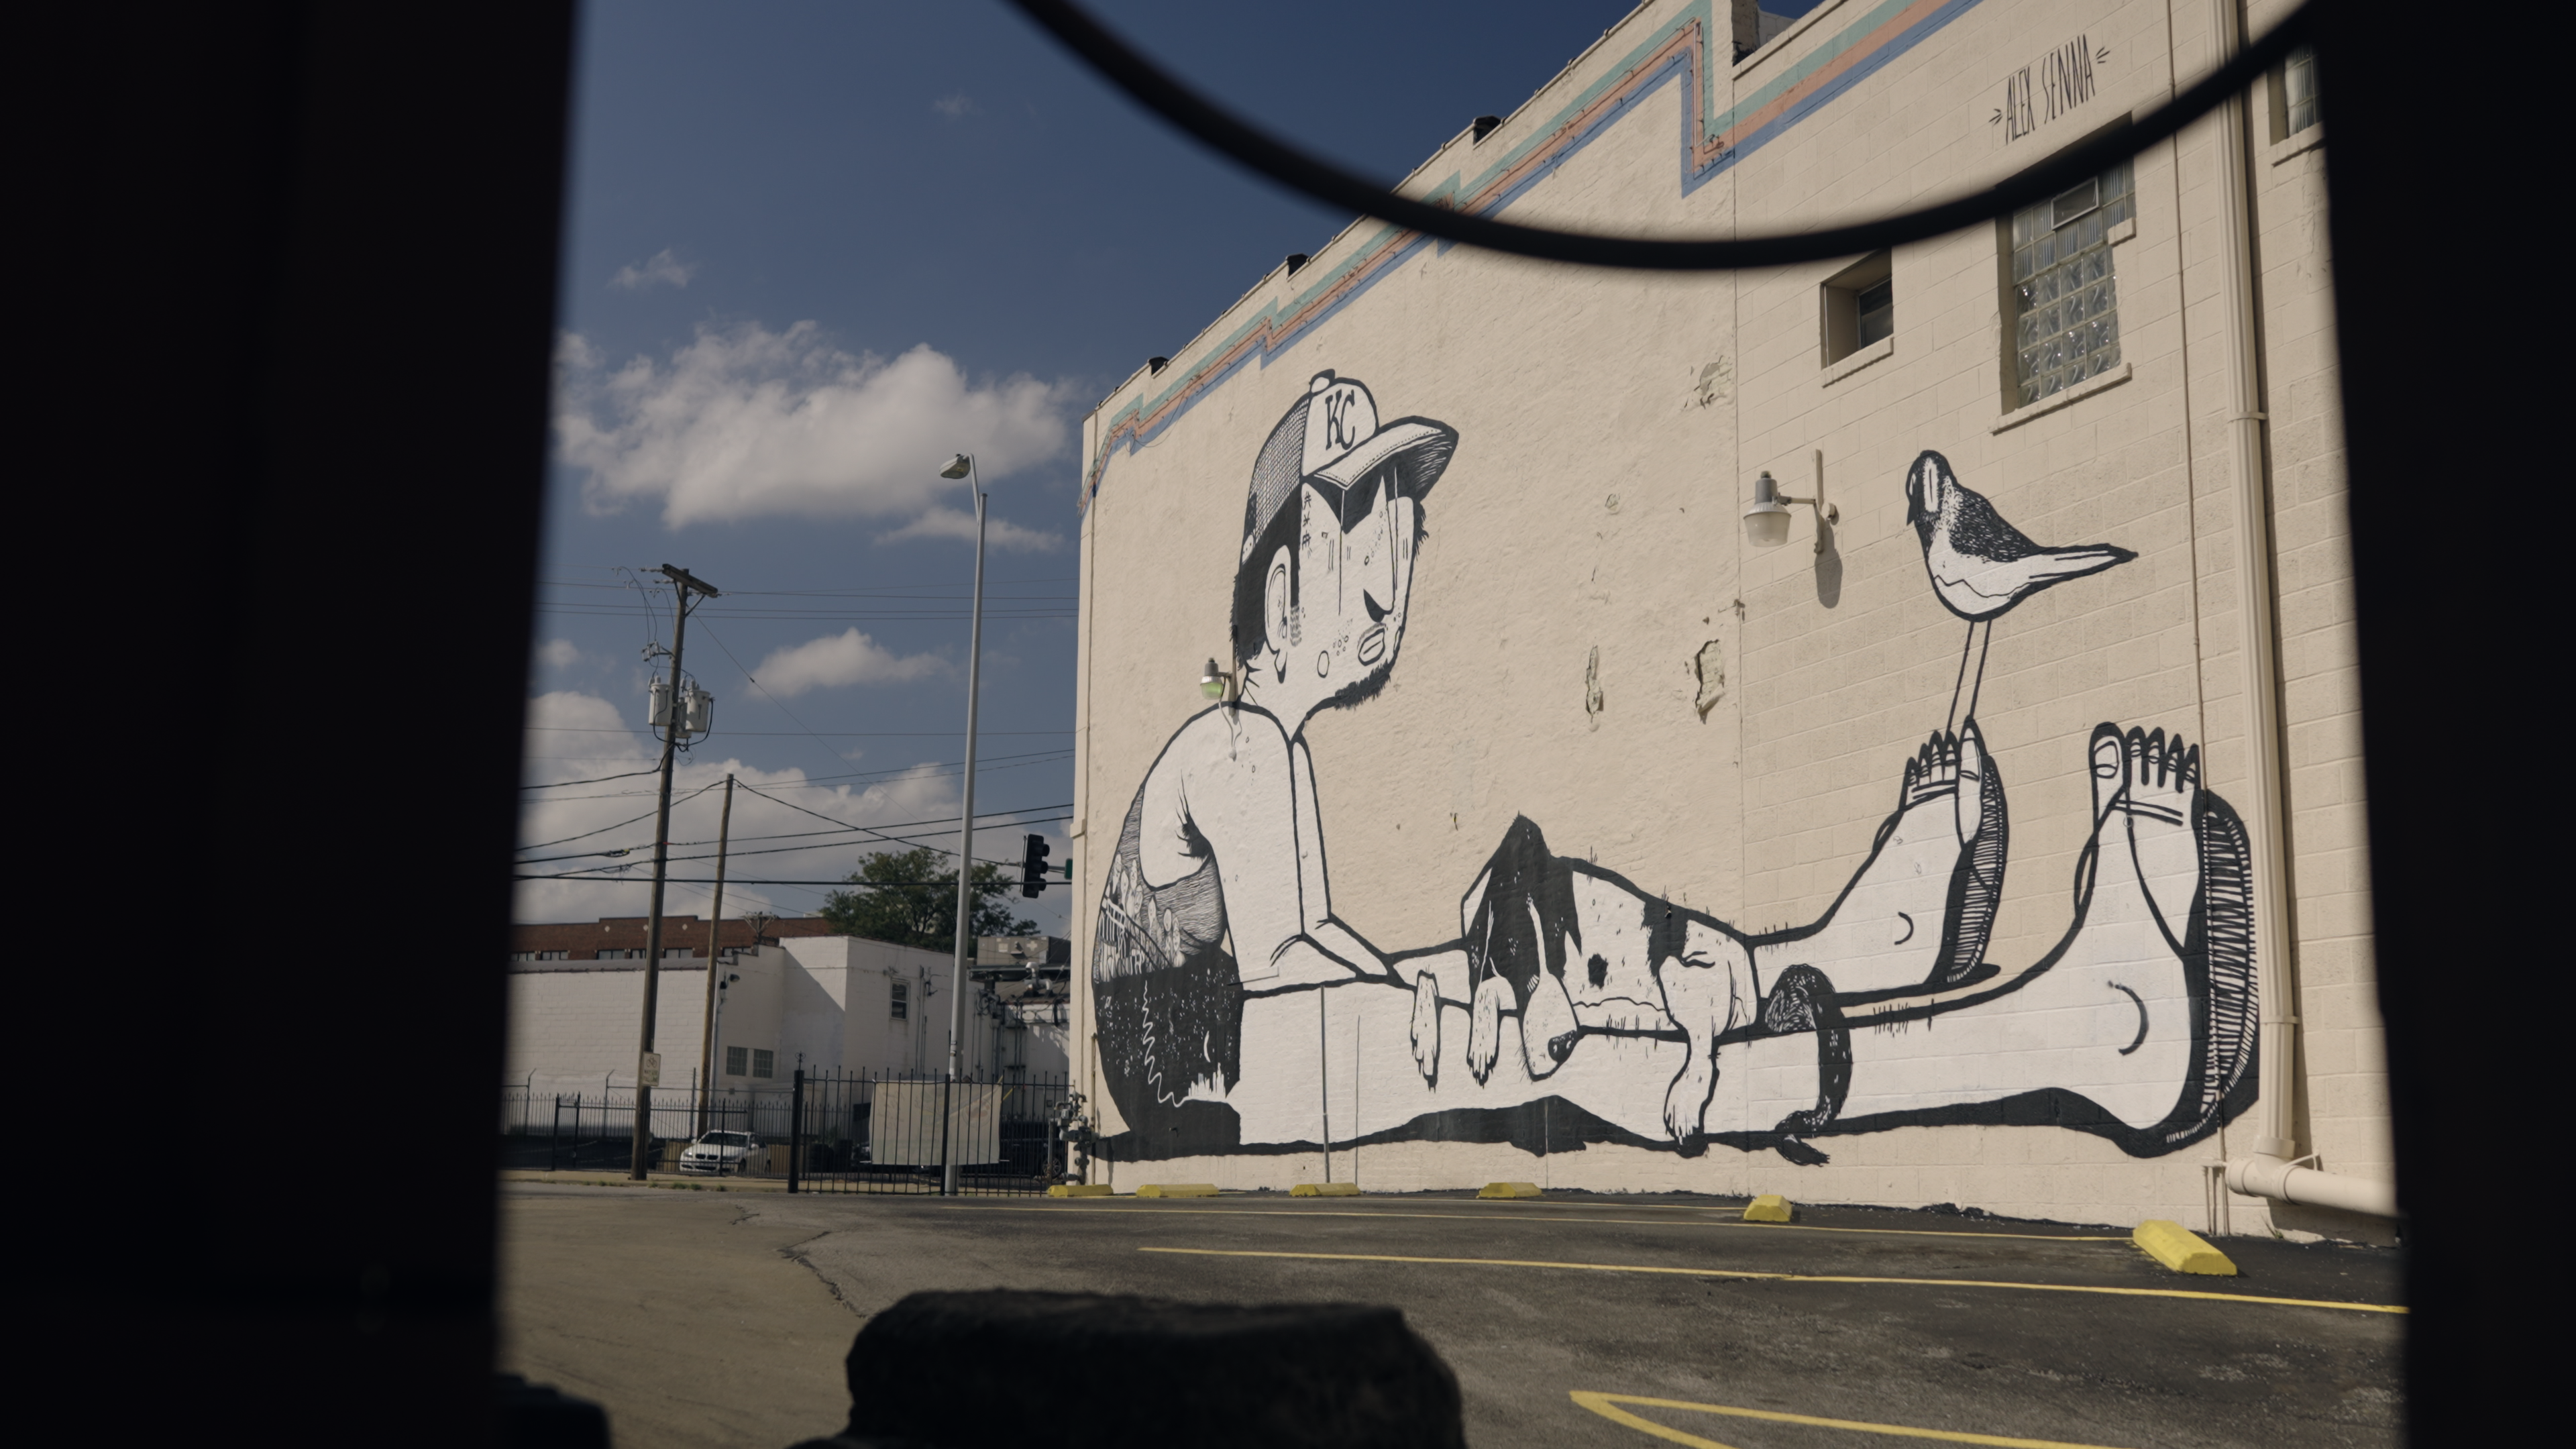 A large mural on an exterior brick wall of a figure sitting with his legs outstretched and dog sitting in his lap